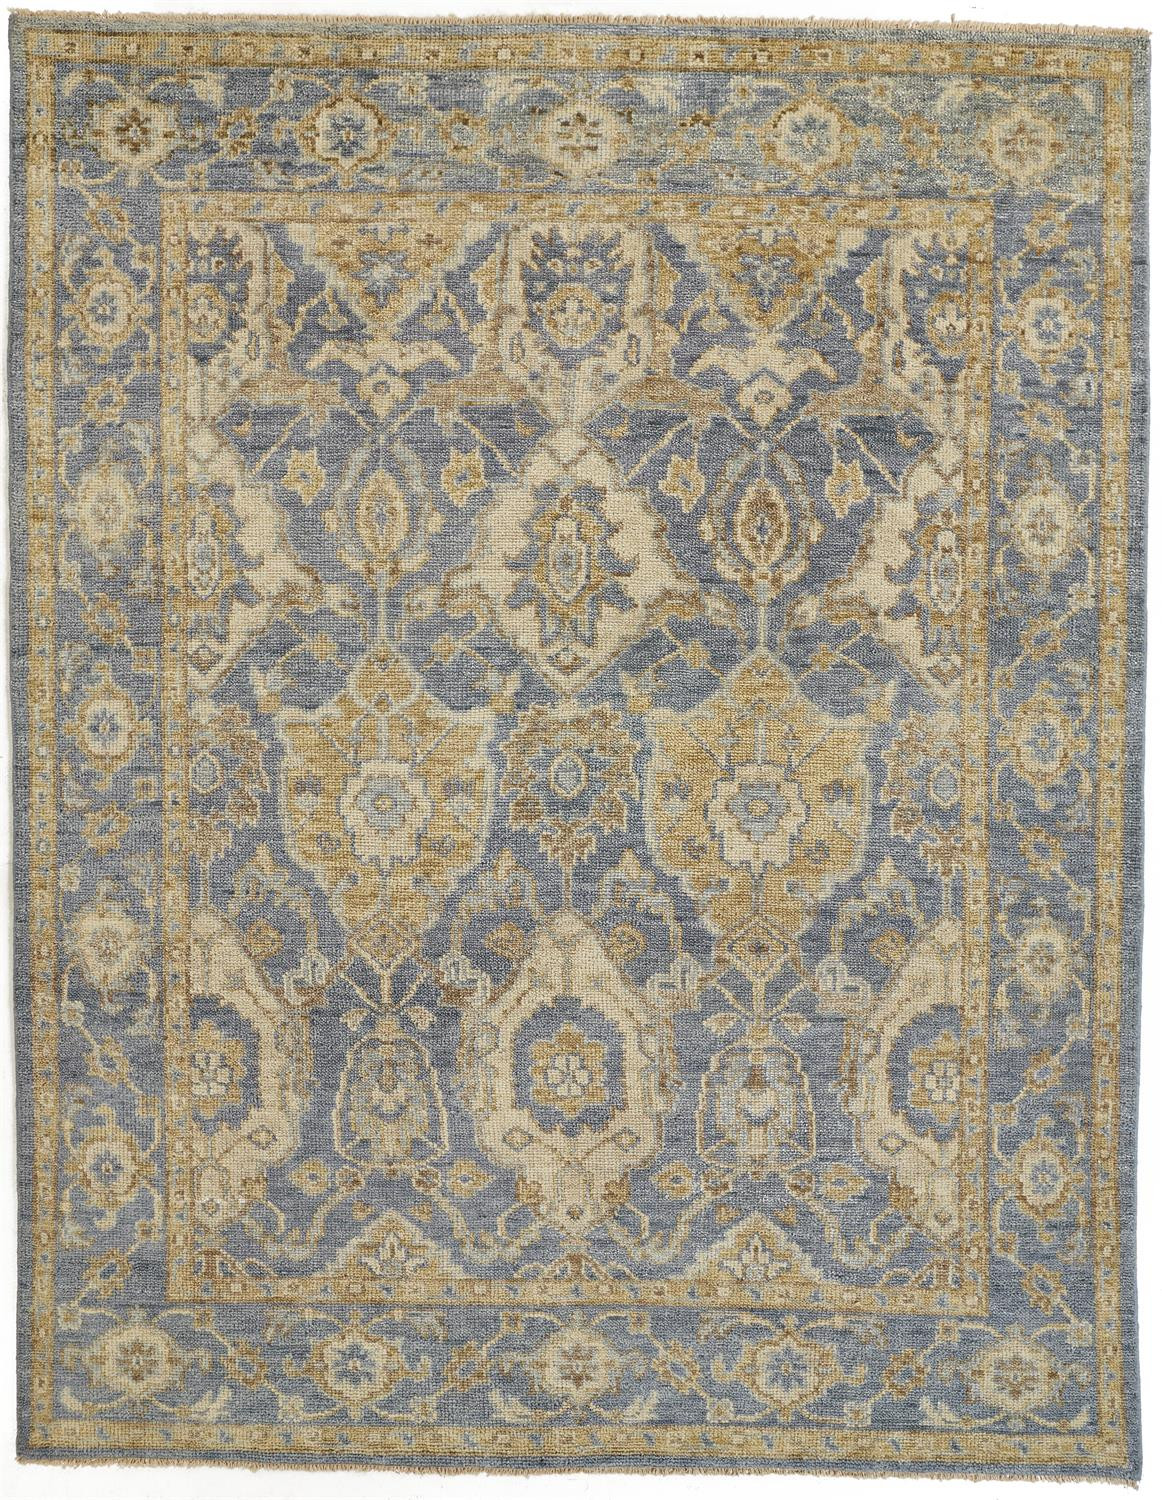 8' X 10' Blue Gold And Tan Wool Floral Hand Knotted Stain Resistant Area Rug With Fringe-512614-1